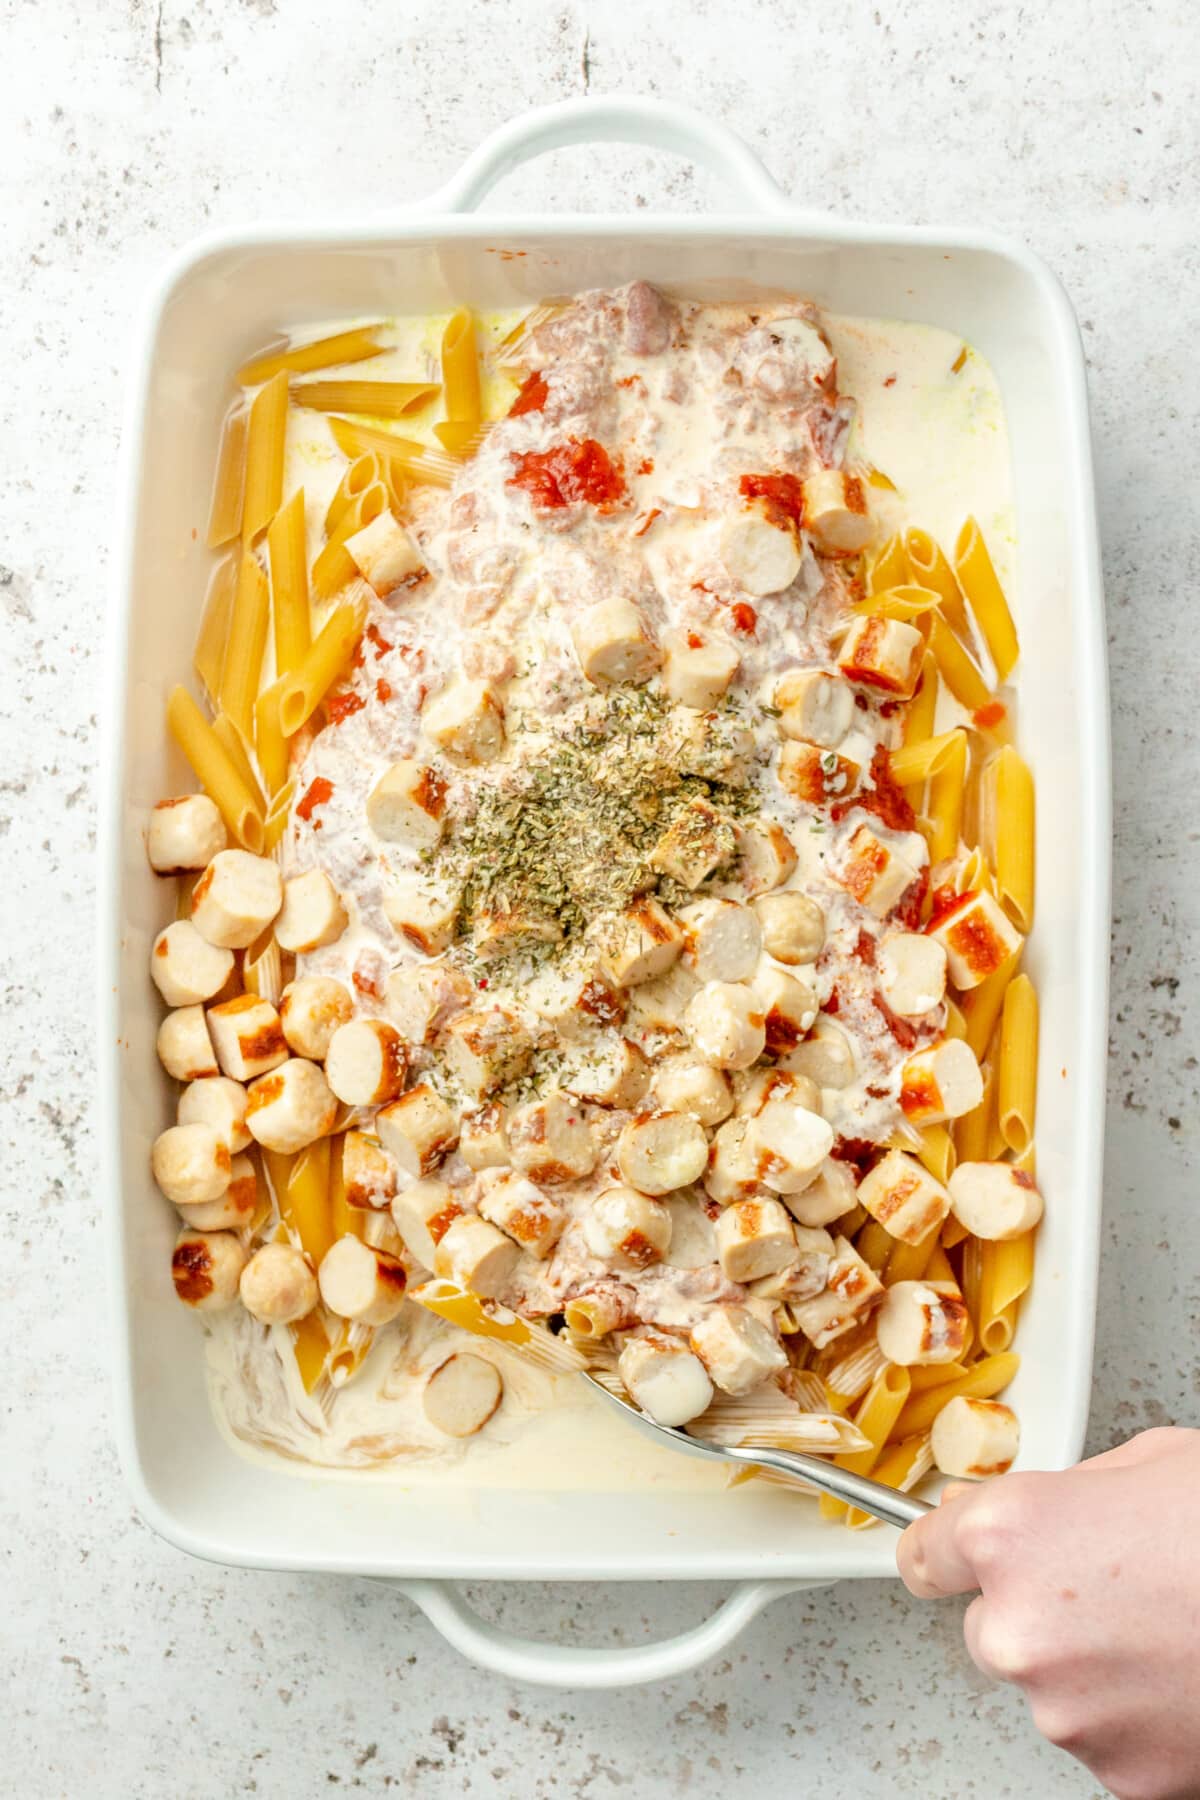 No bake pasta bake ingredients are stirred together in a baking dish on a light grey colored surface.